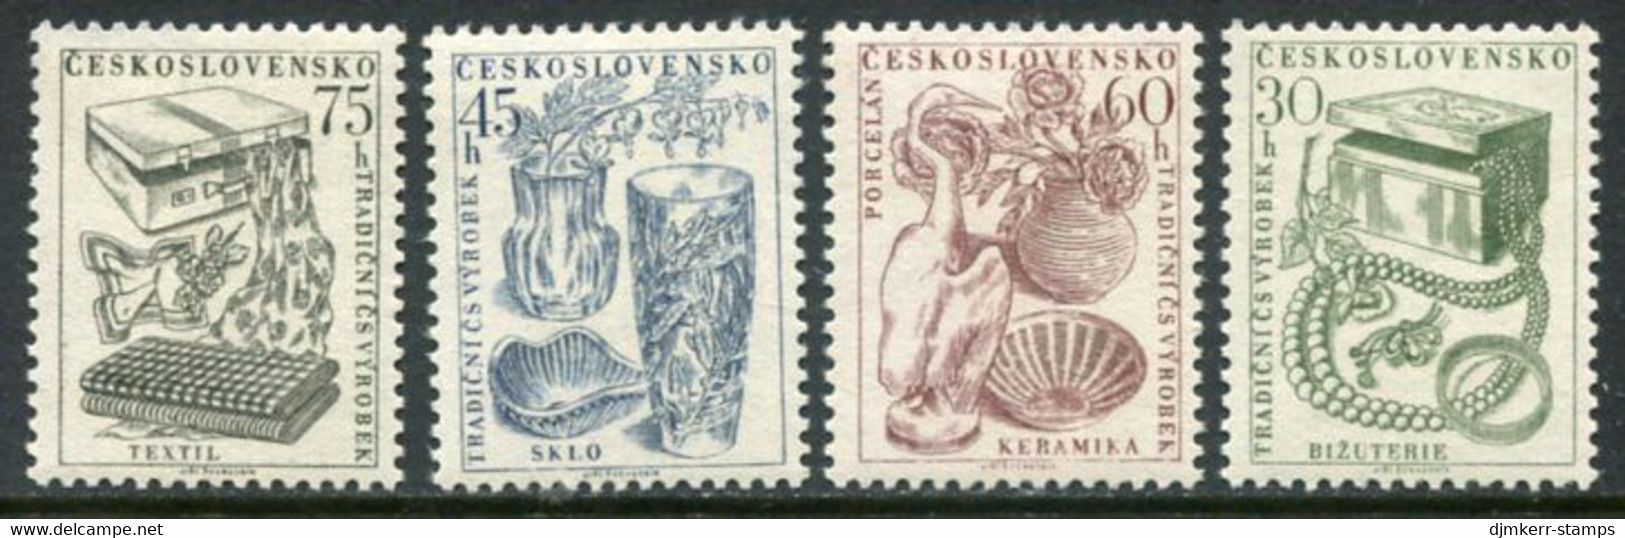 CZECHOSLOVAKIA 1956 Export Products MNH / **.  Michel 954-57 - Unused Stamps